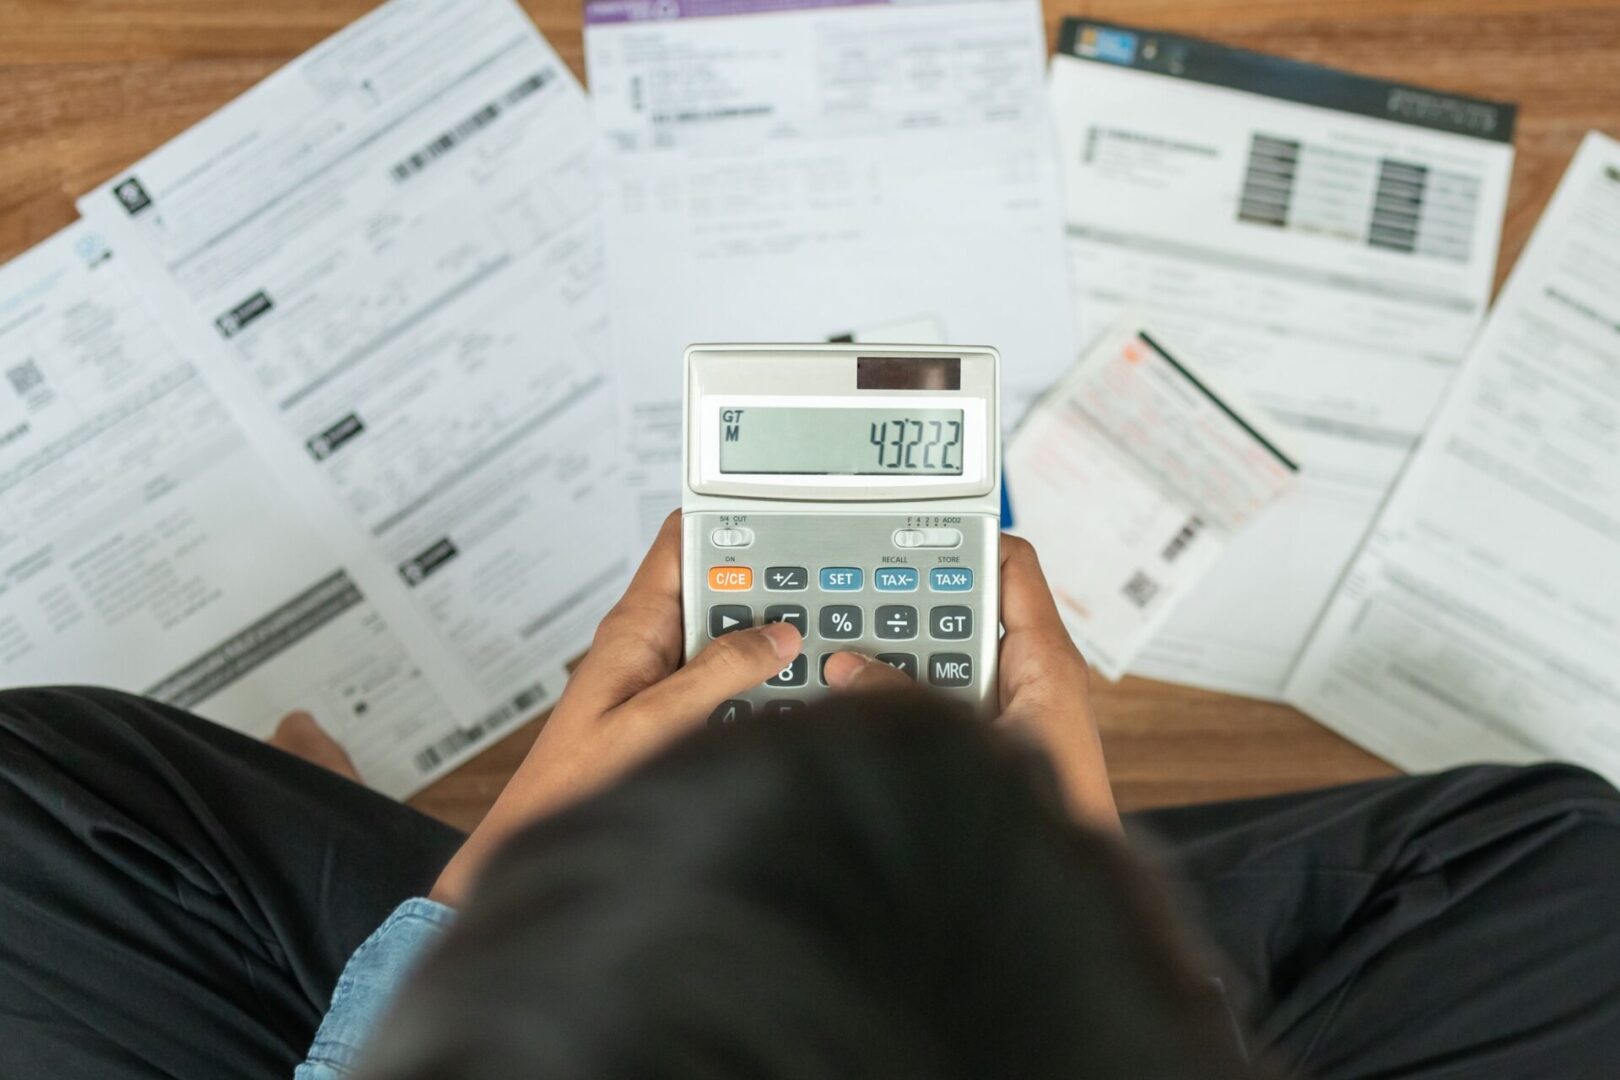 A person holding an electronic calculator in front of papers.